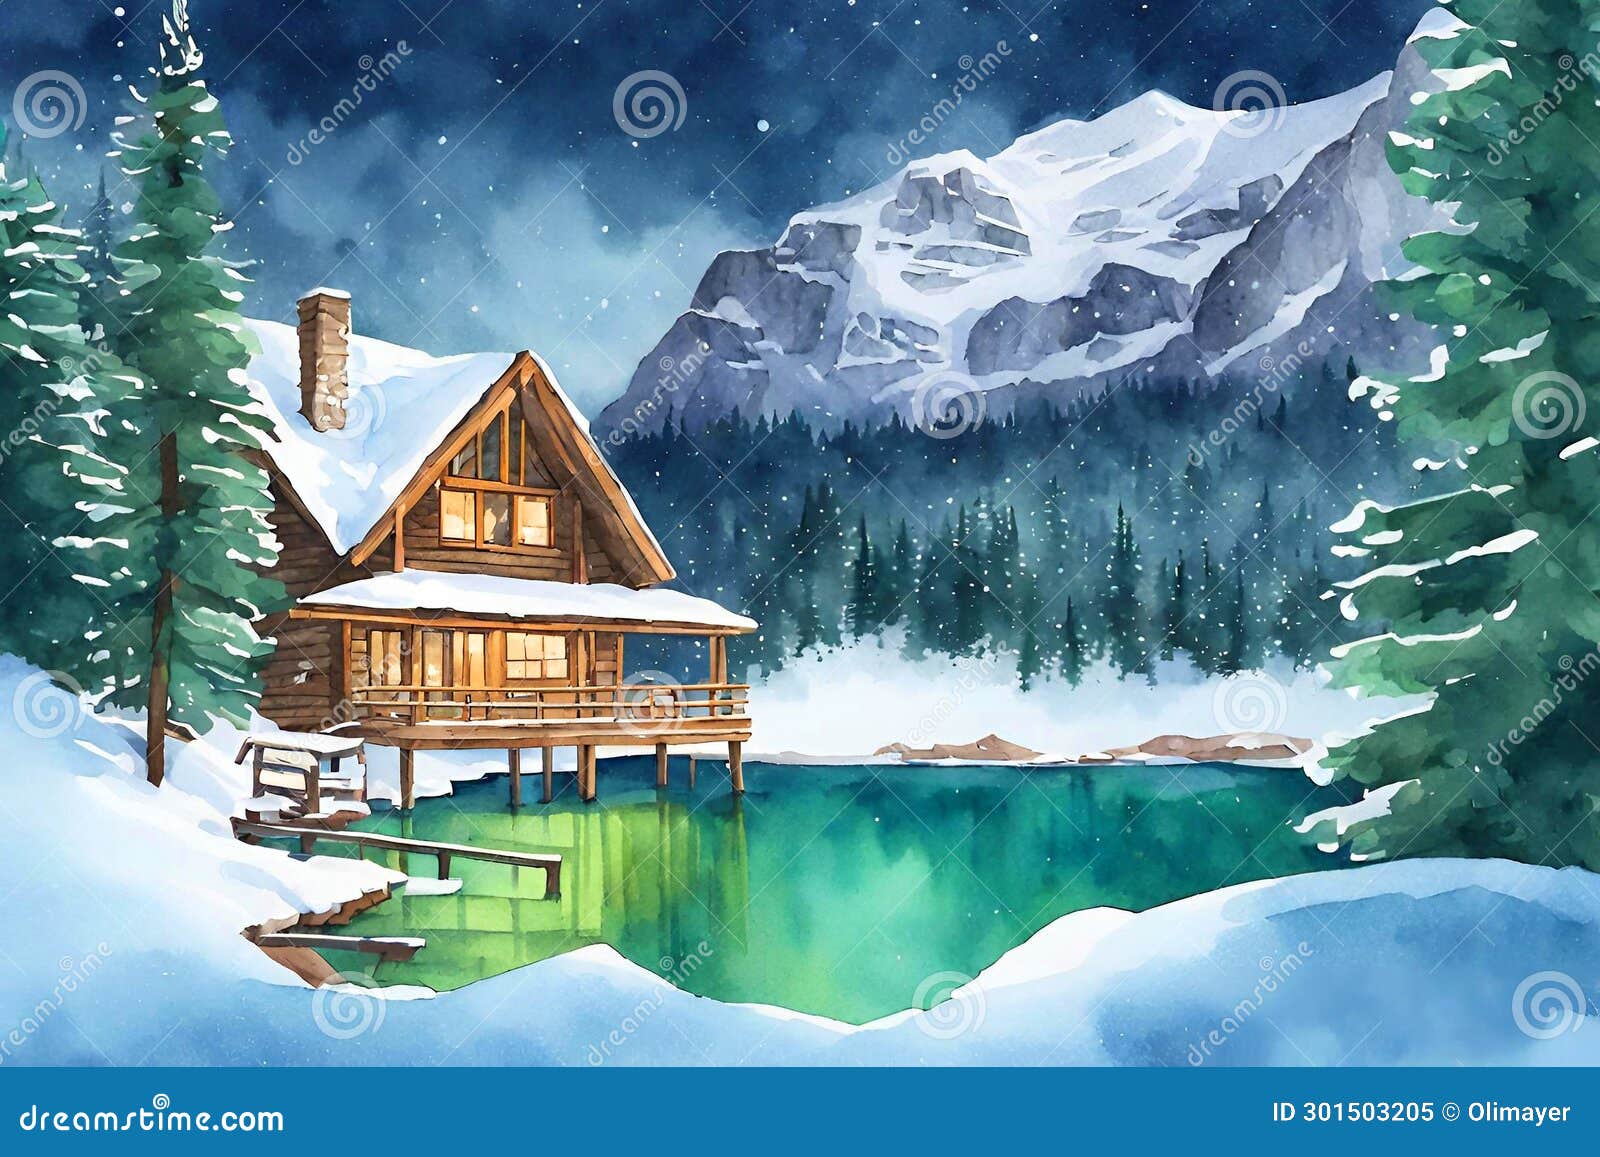 watercolor  of luxury villas in the swiss alps with lake views in winter.